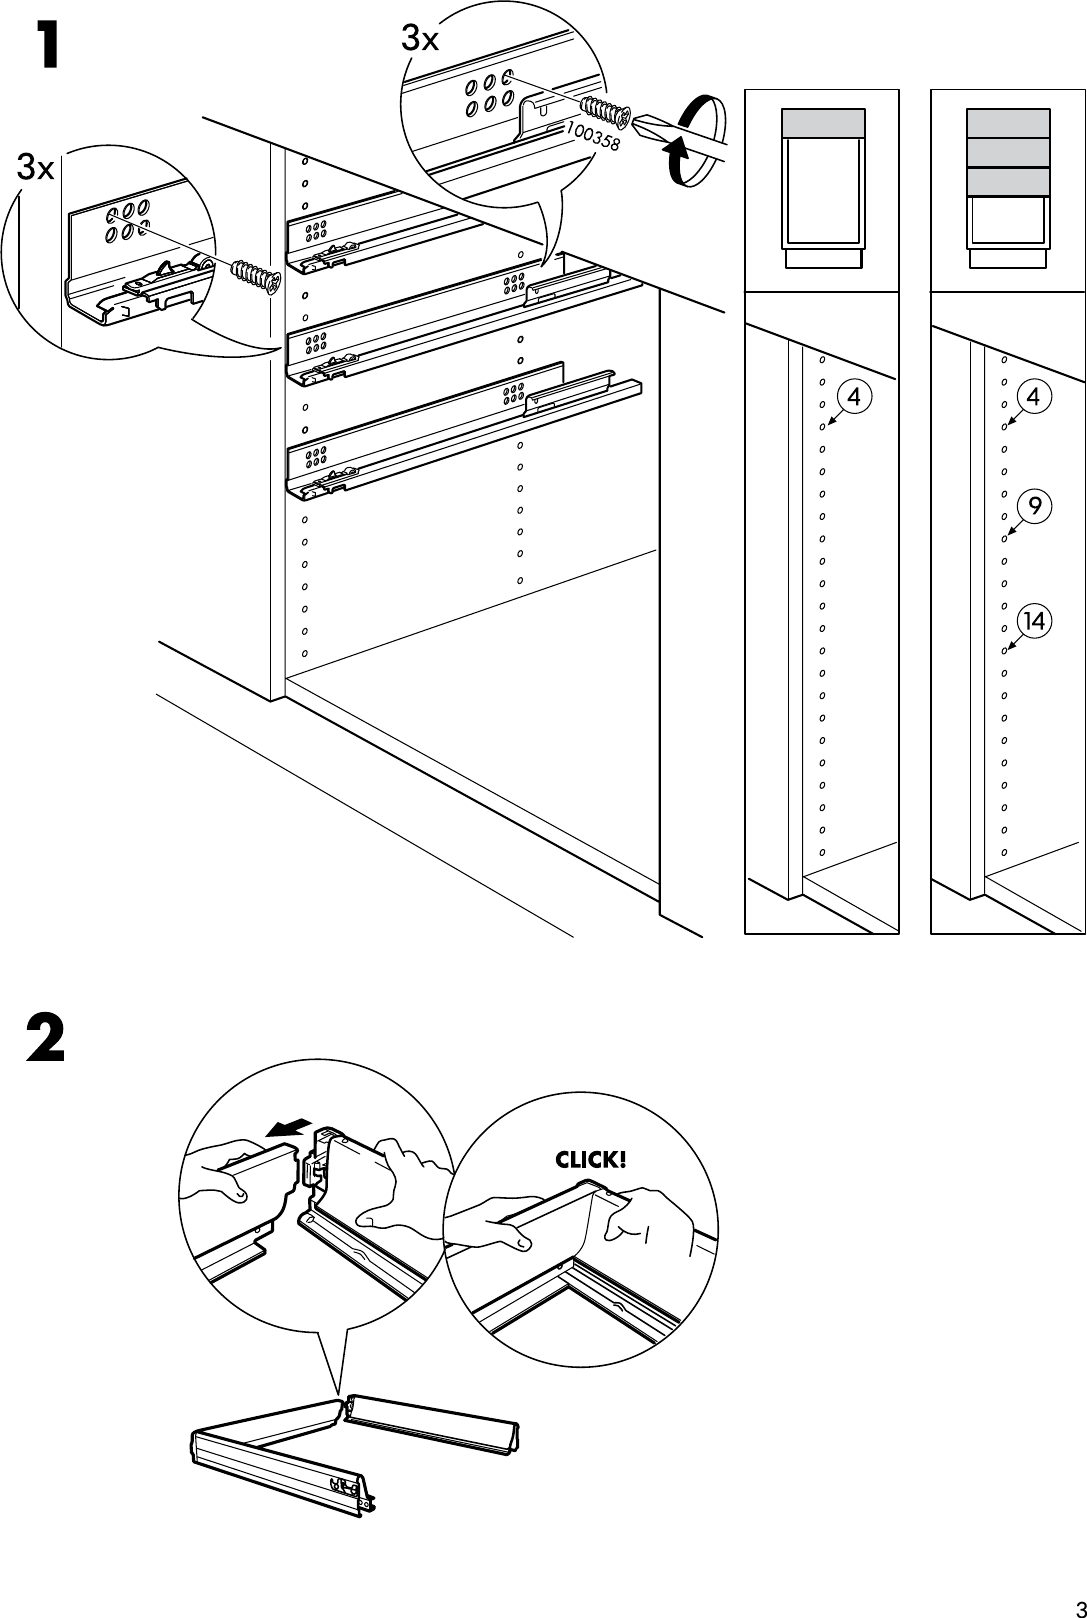 Page 3 of 8 - Ikea Ikea-Rationell-Full-Extending-Drawer-15-Assembly-Instruction